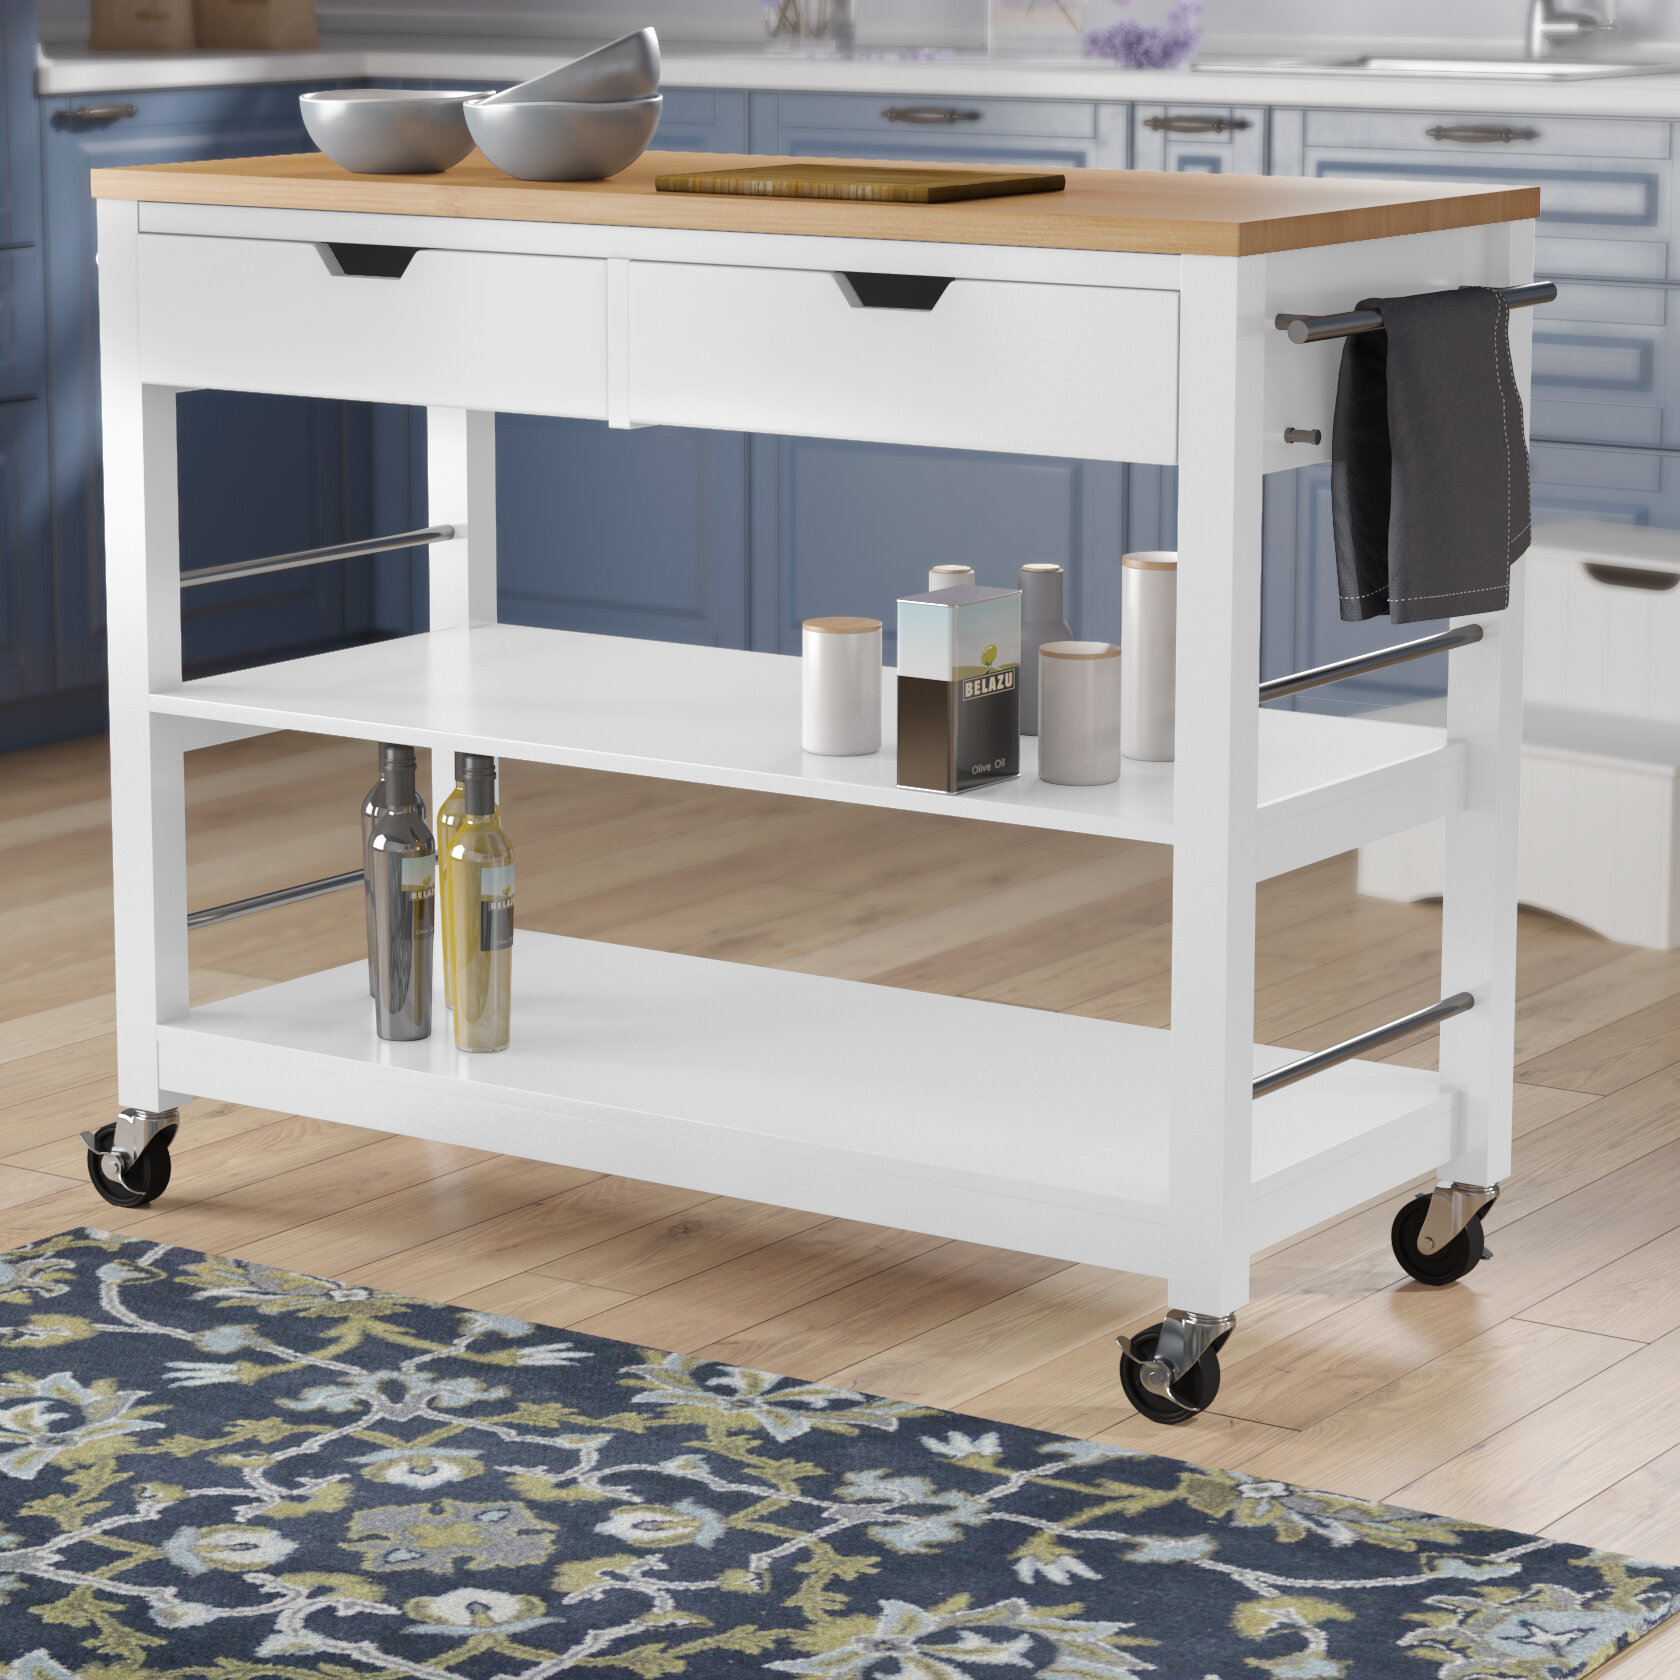 Details about   Wood Top Kitchen Island Rolling Cart with 1 Drawer & Single Door Storage White 